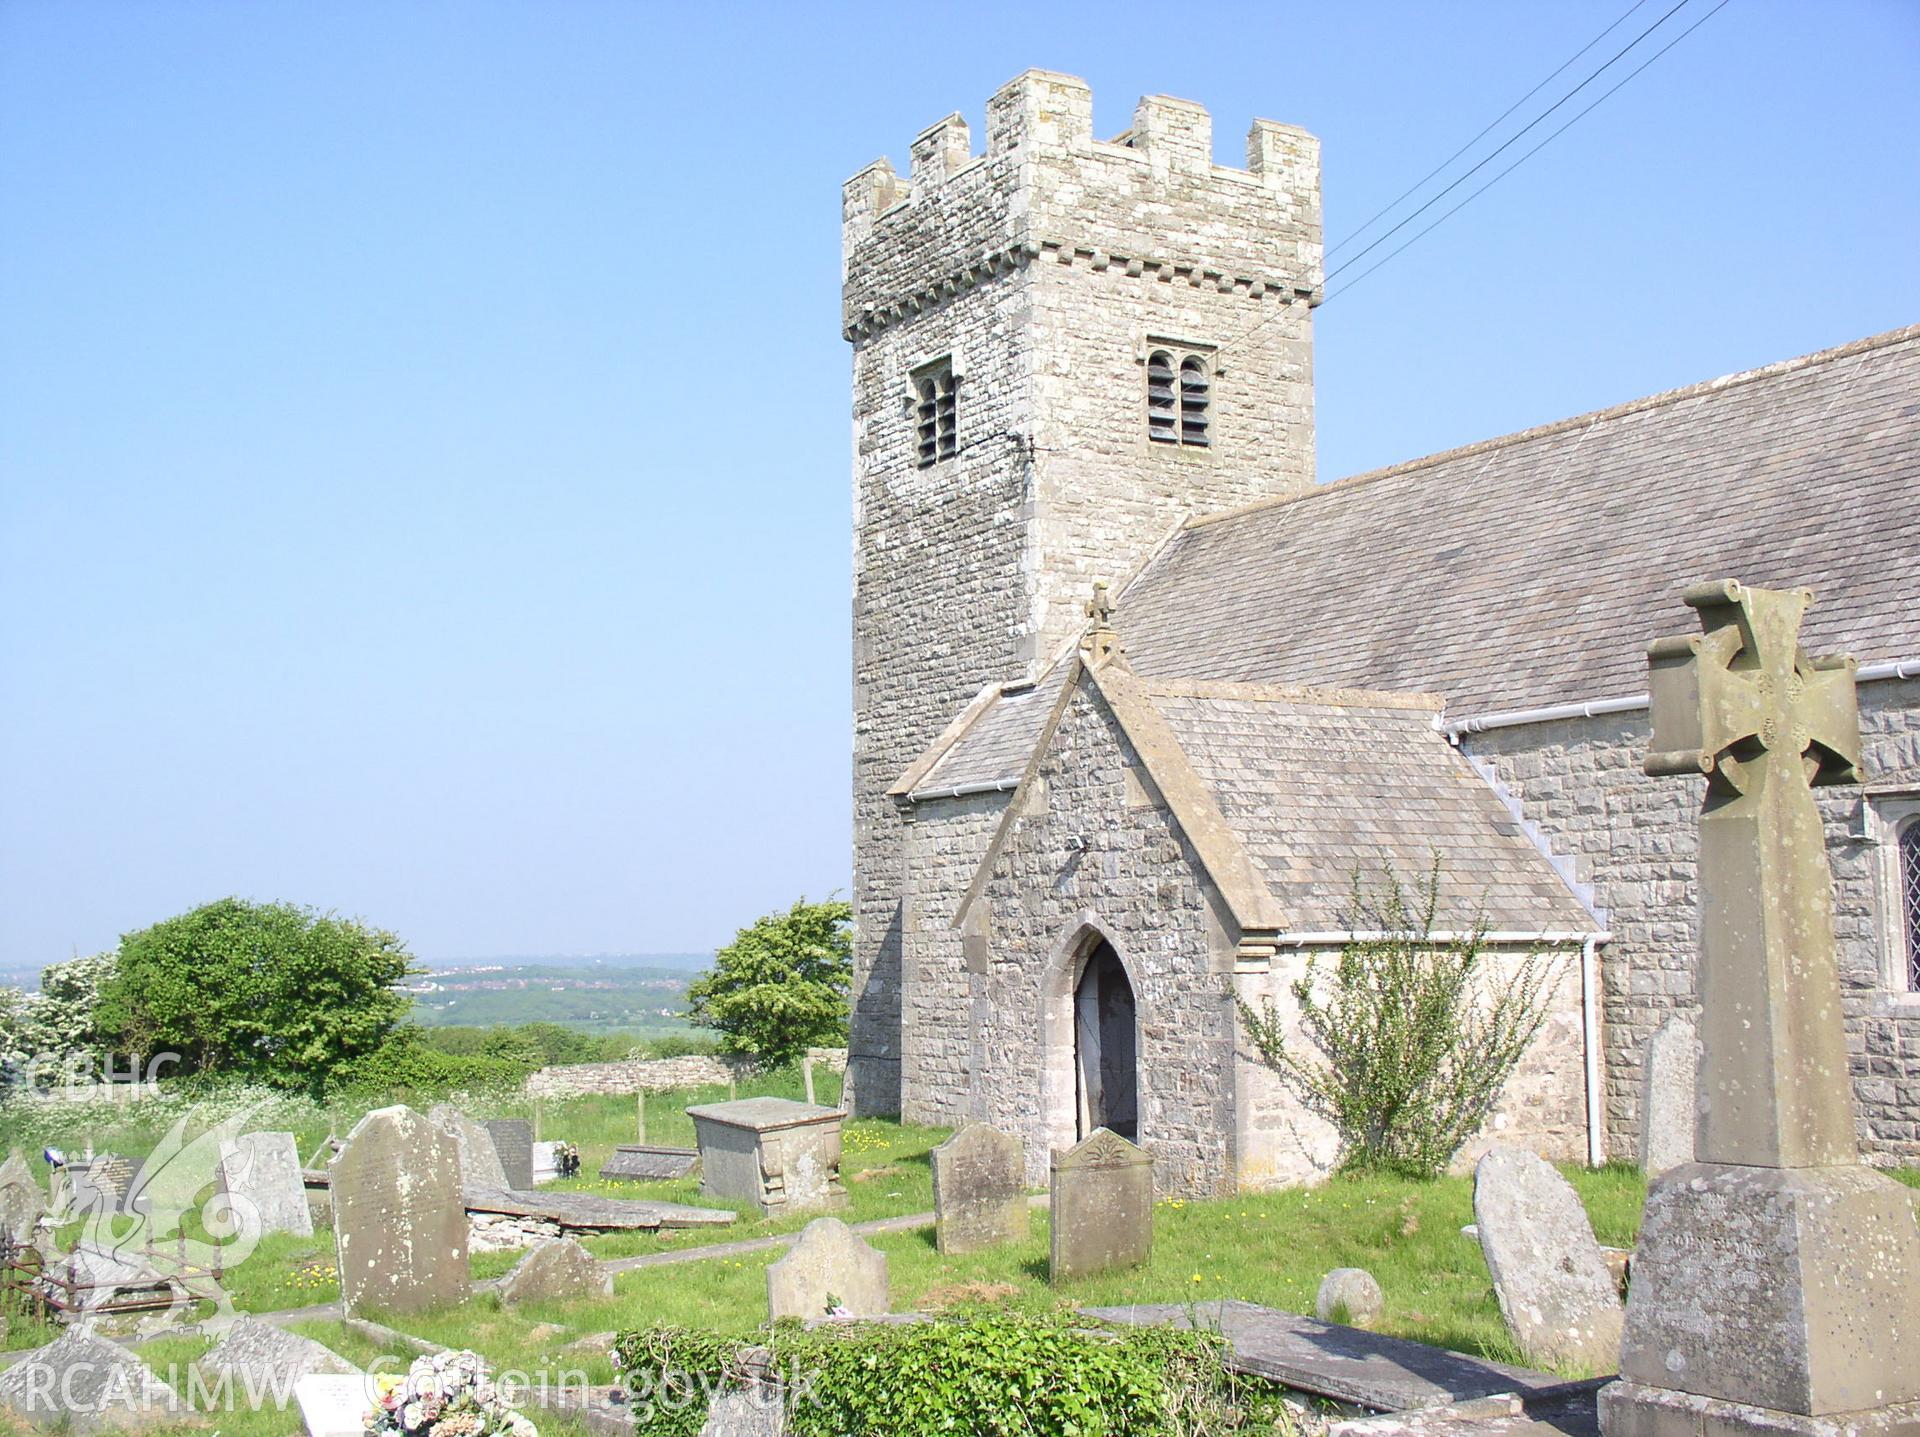 Colour digital photograph showing an elevation view of St Mary's Church, Penmynydd; Glamorgan.